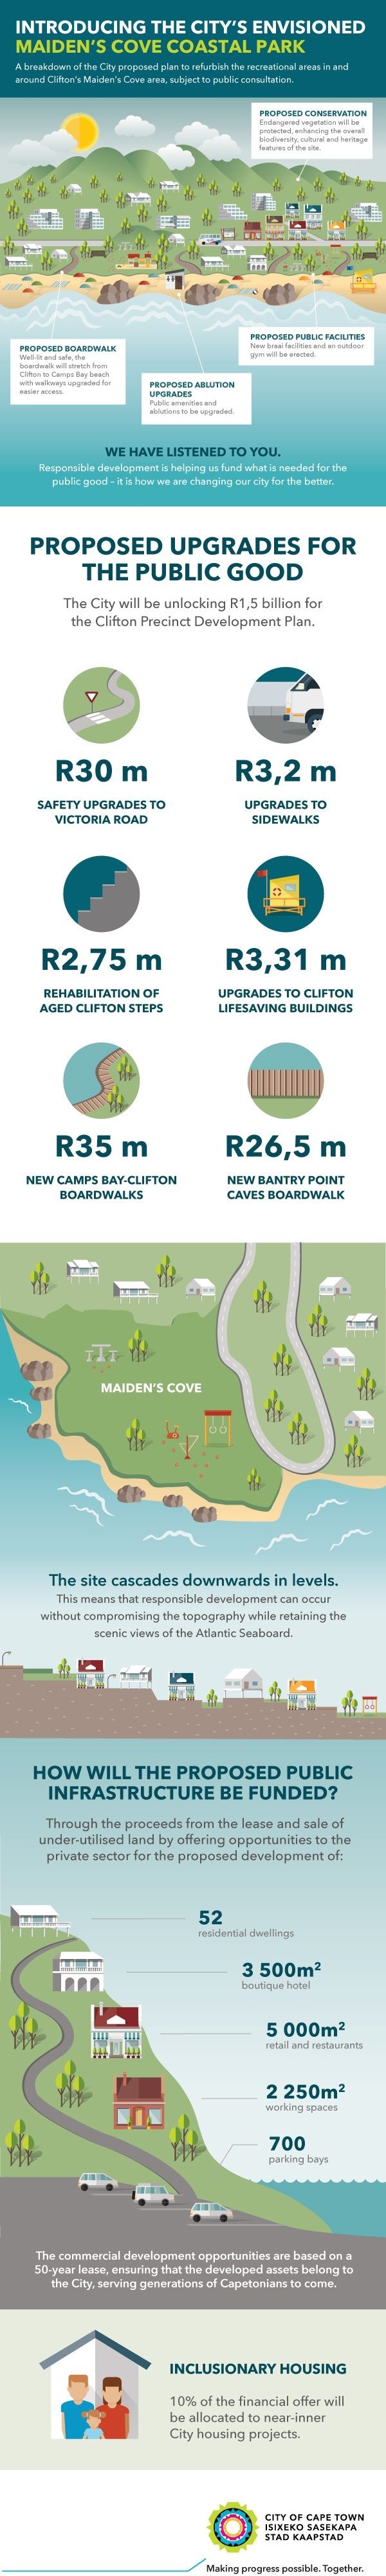 CT drops opposition to Maiden's Cove review application